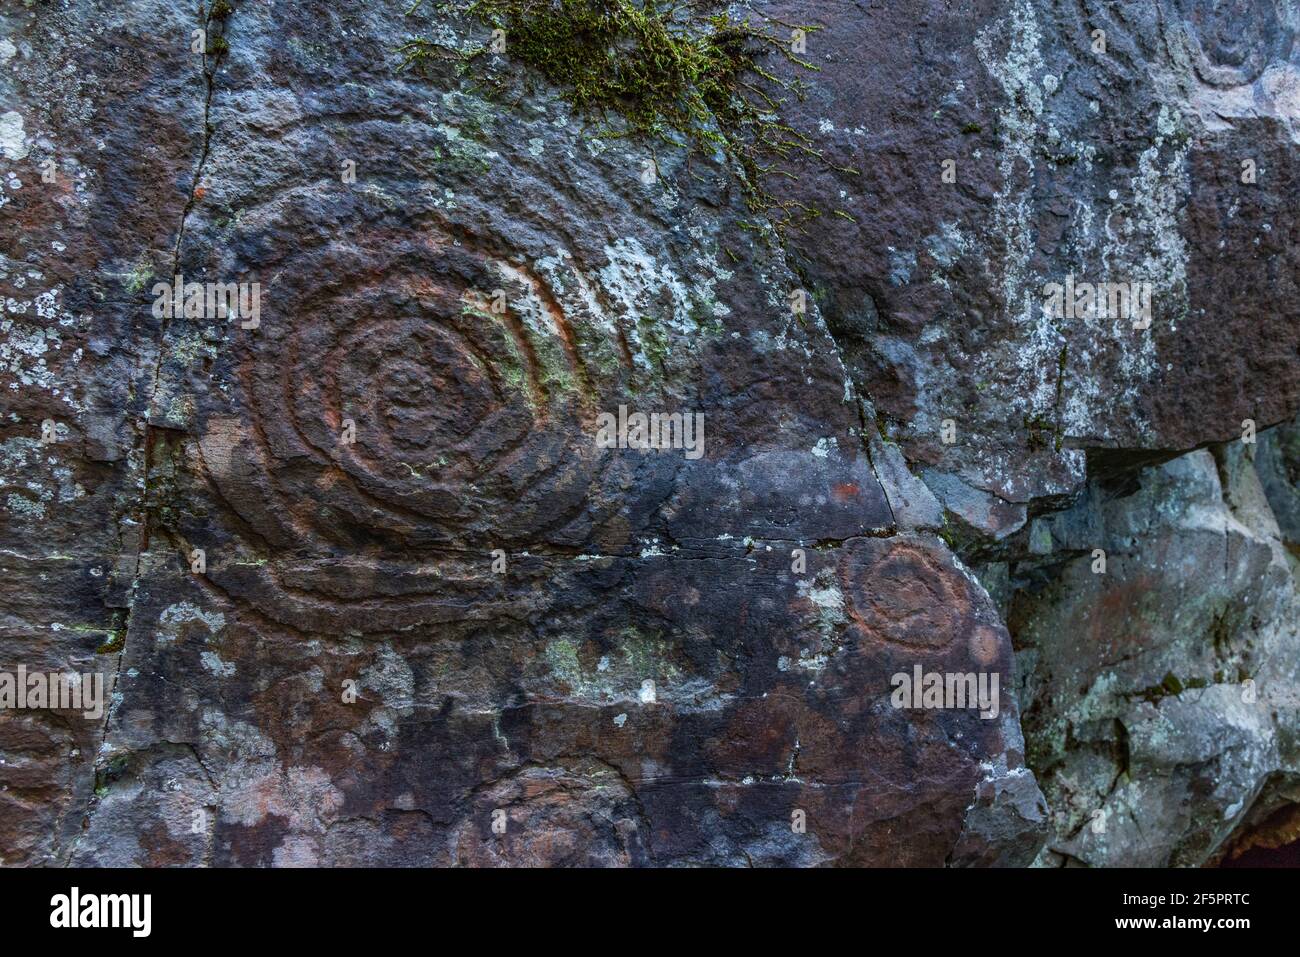 Stone engravements made by indigenous people at La Zarza cultural park, La Palma, Canary islands, Spain. Stock Photo